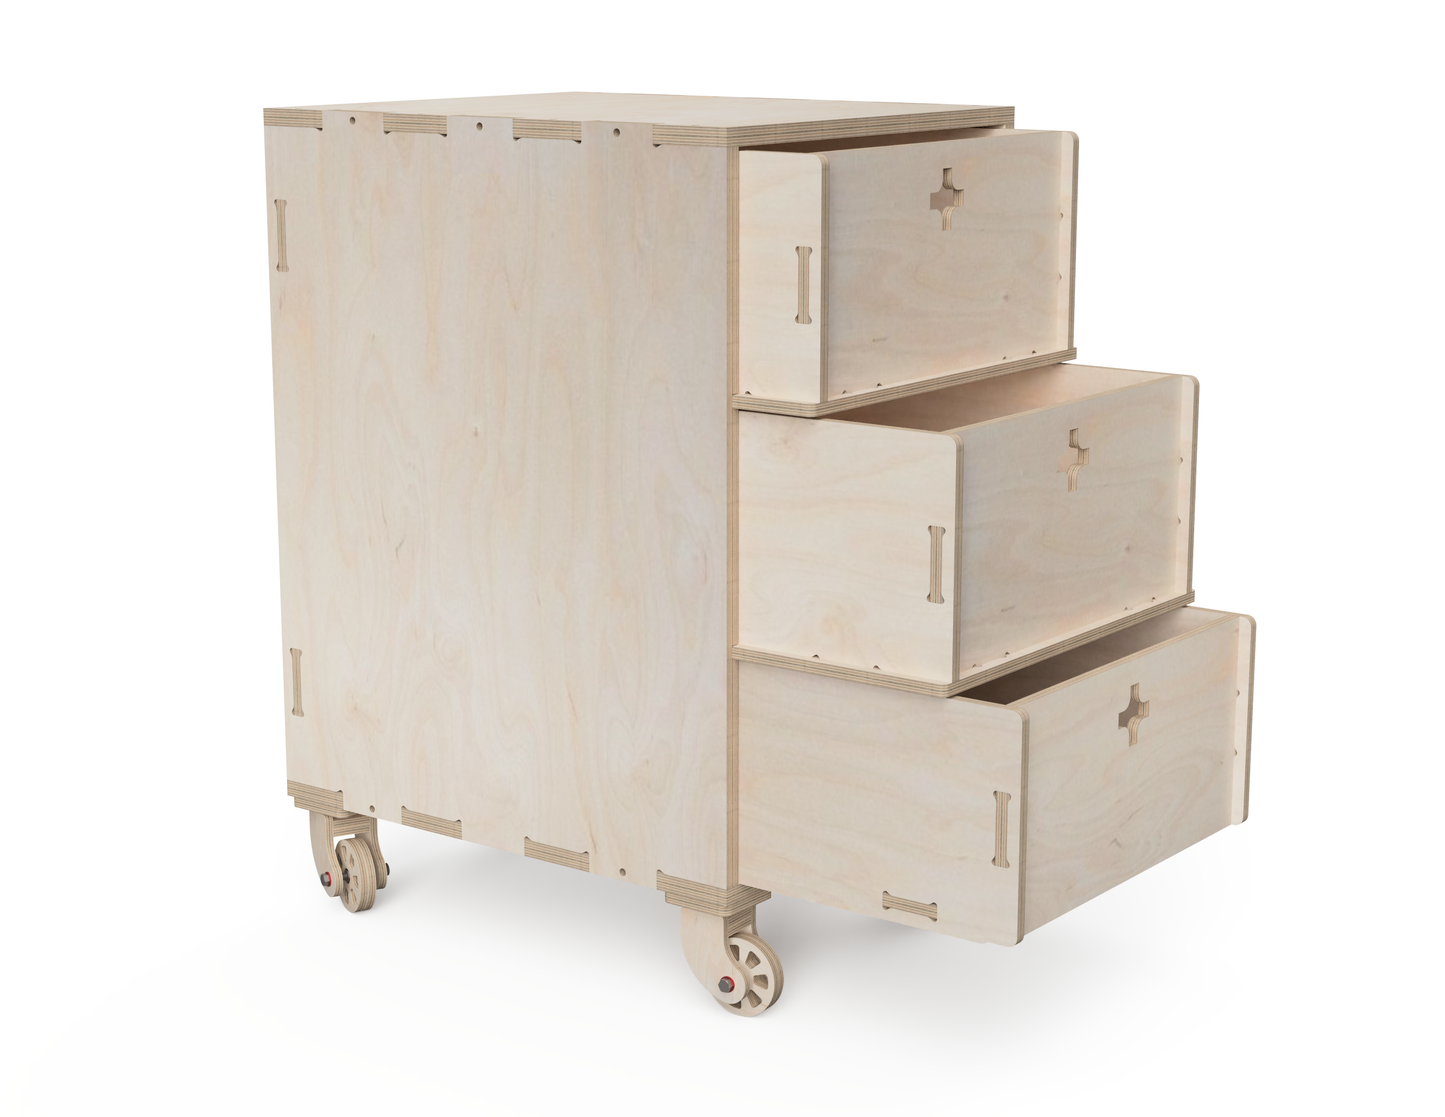 Three Drawer Cabinet For Workshop DXF Files